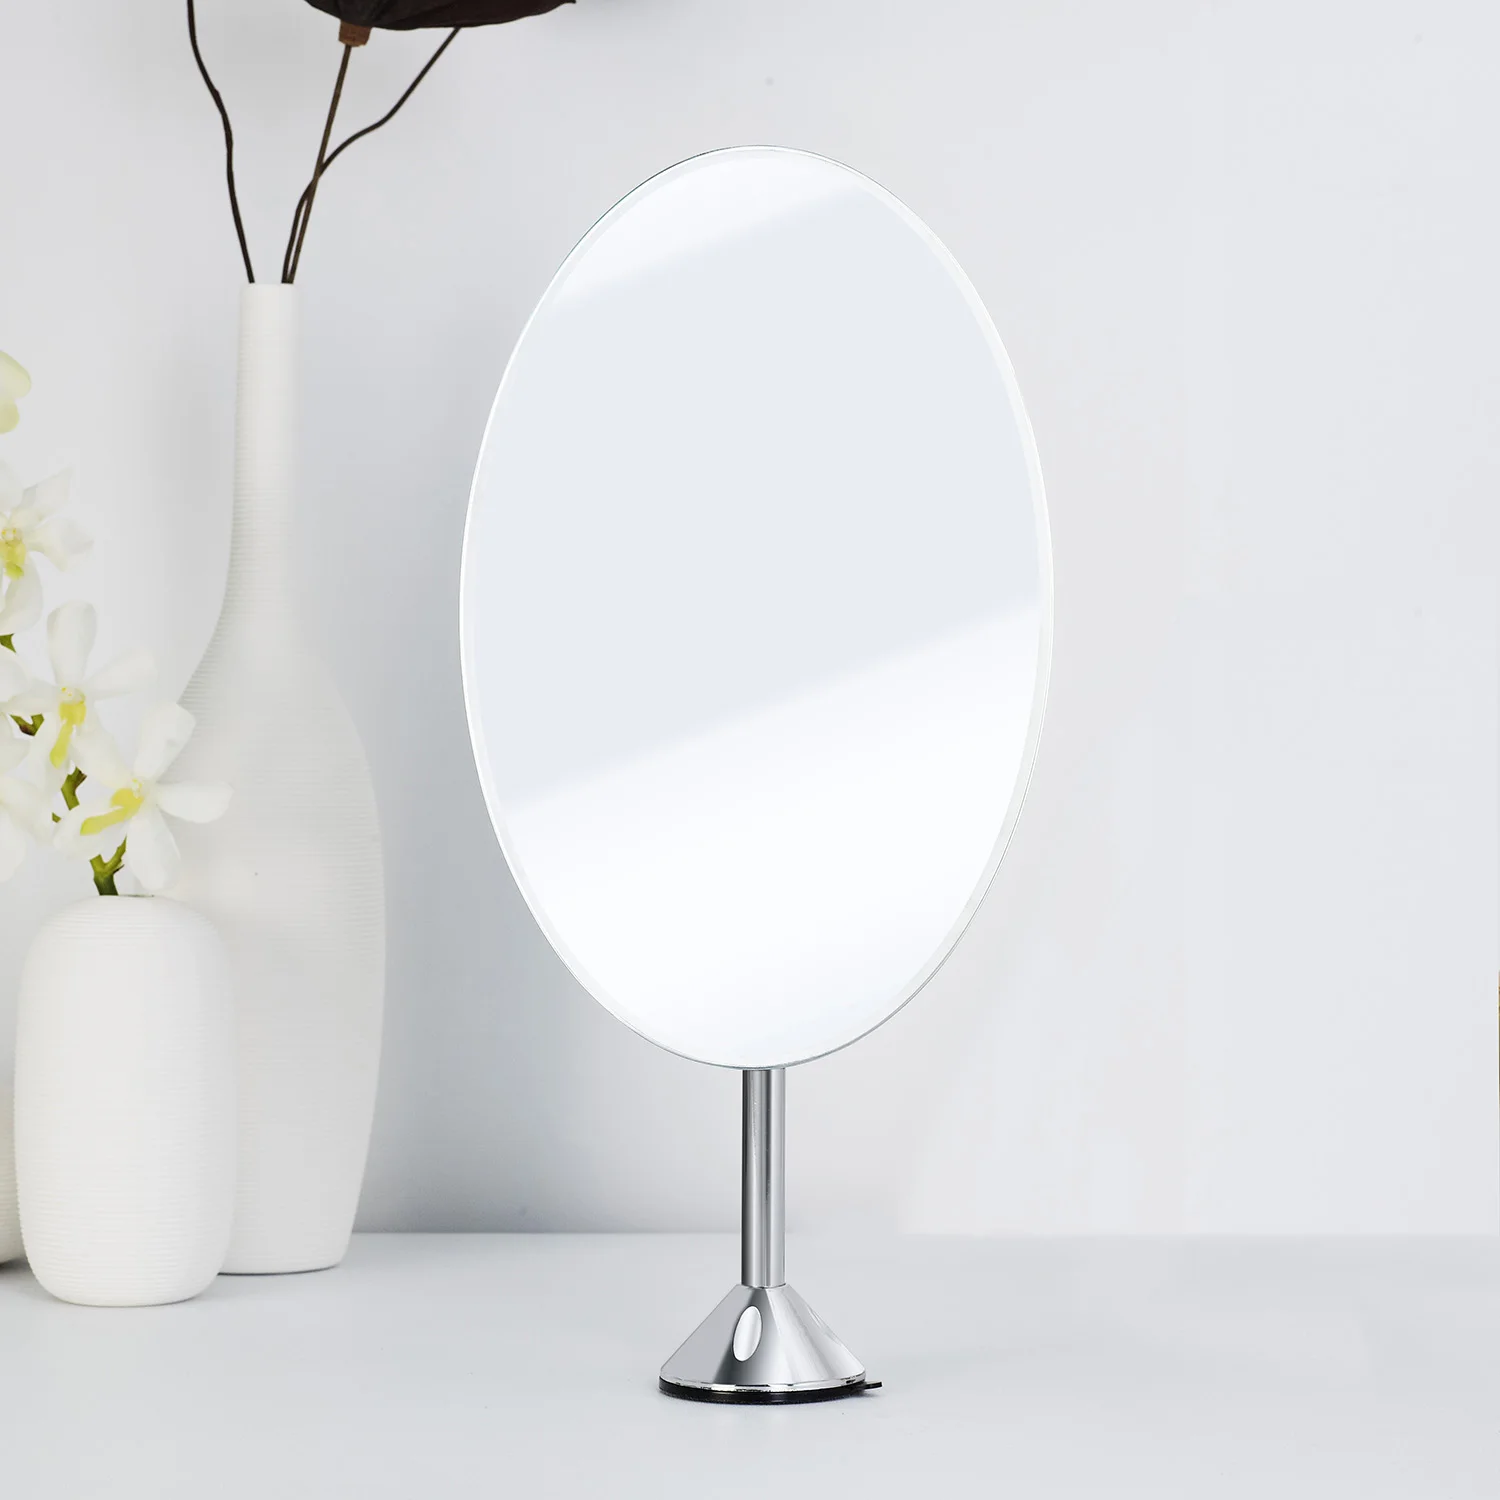 Single Side Metal Chrome Oval Shaped Countertop Stand Pedestal Cosmetic Mirror